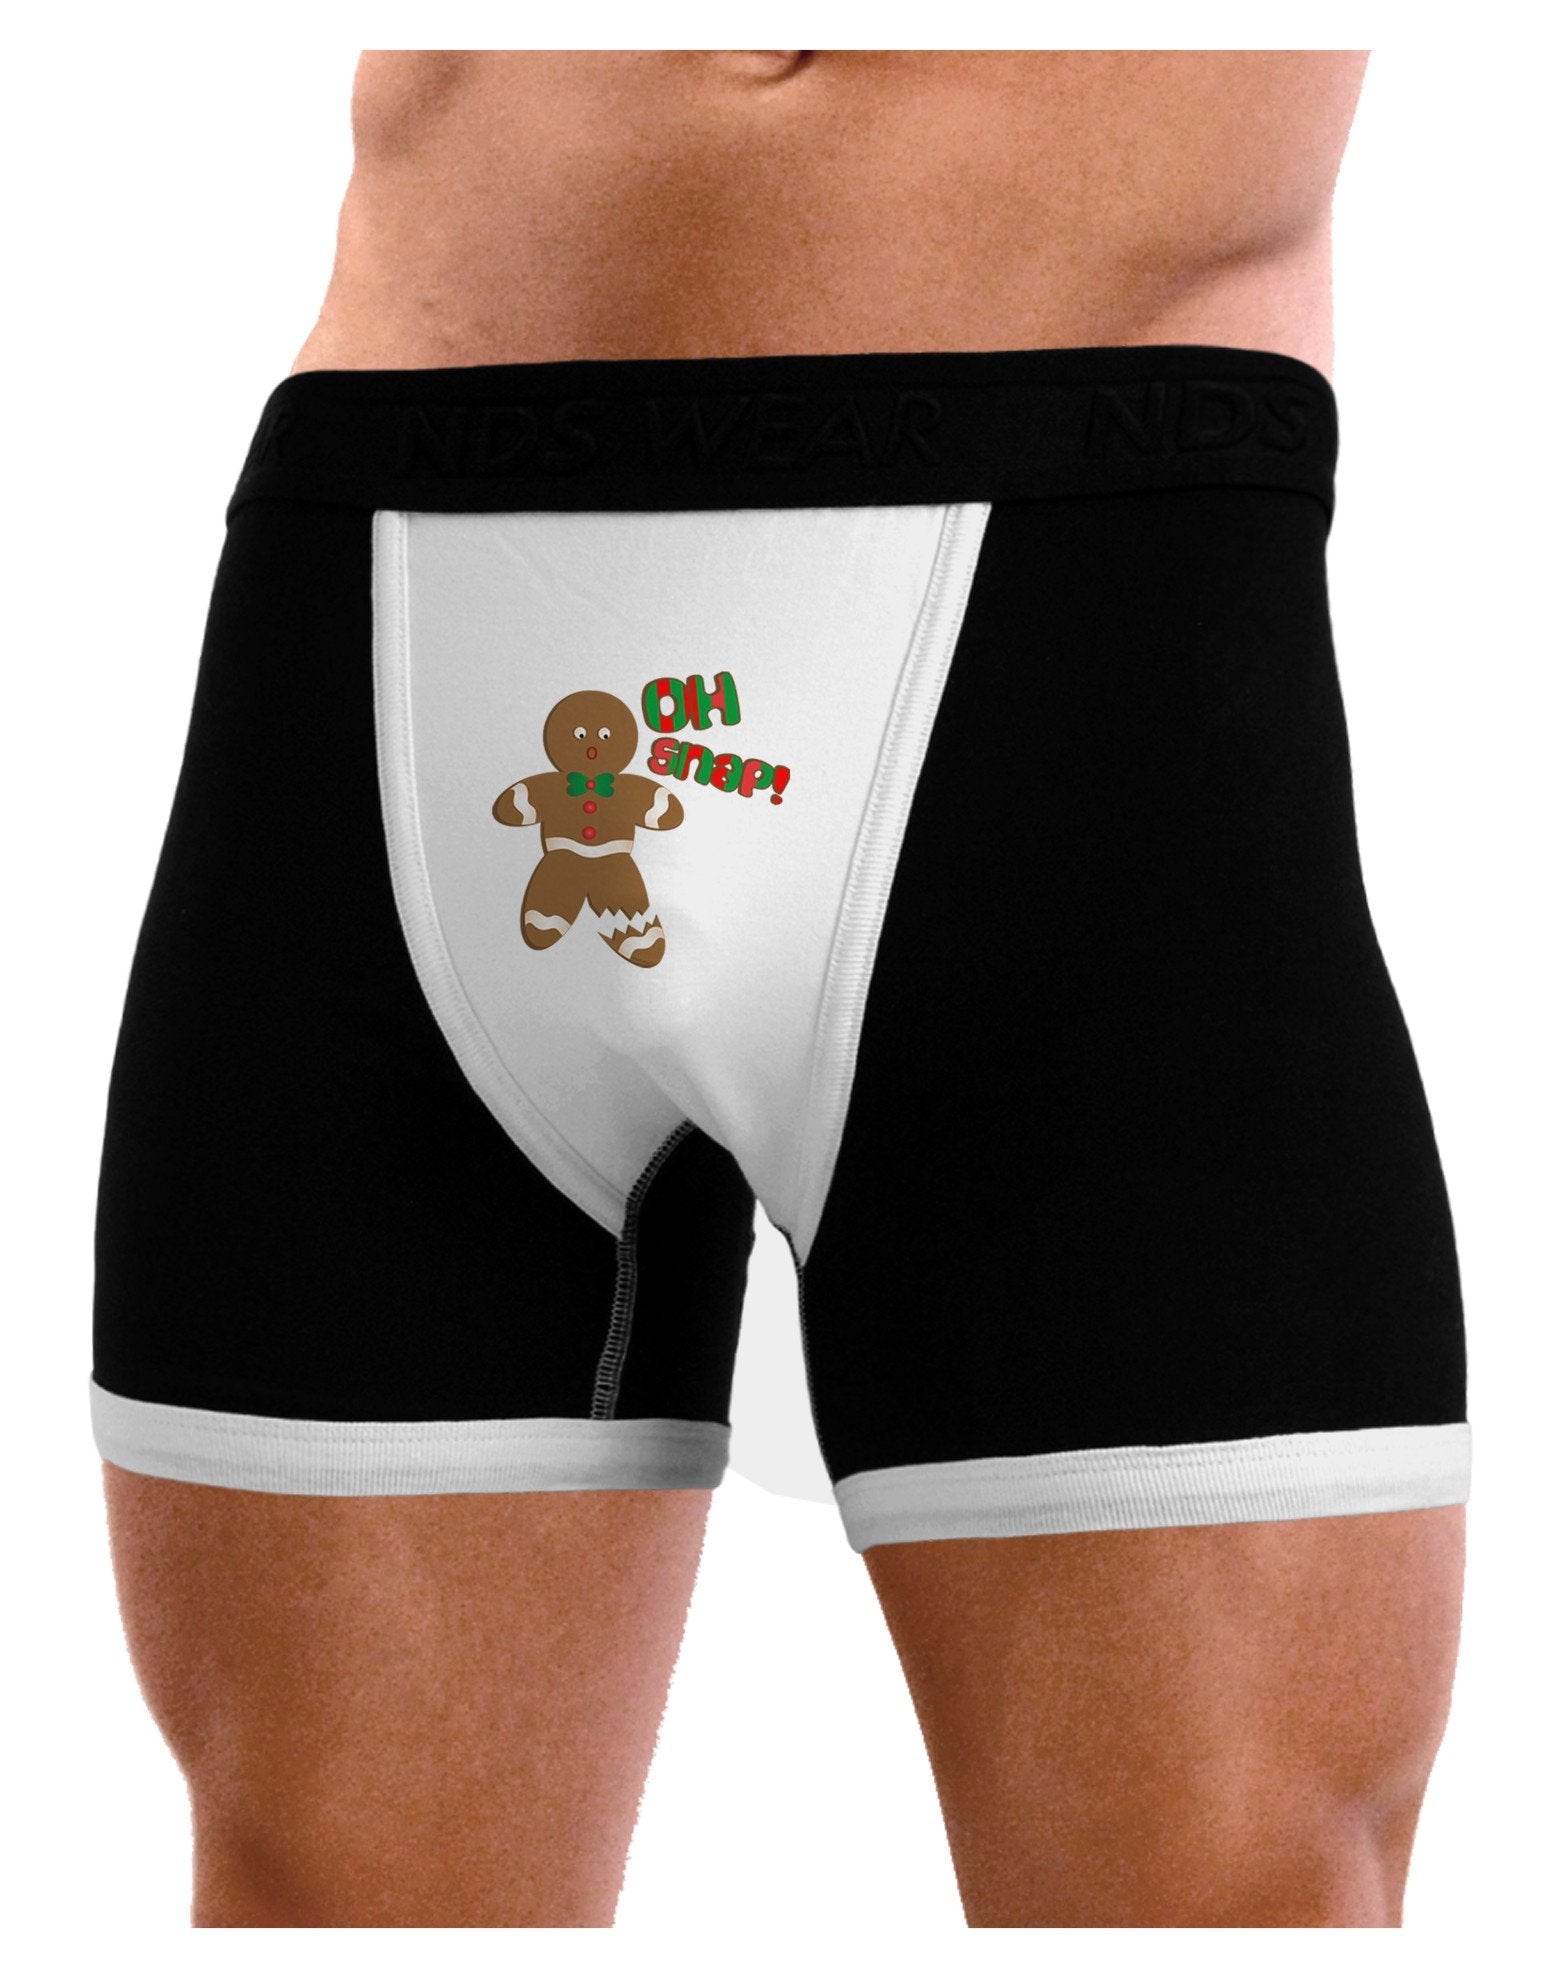 Men boxers briefs Christmas with gingerbread